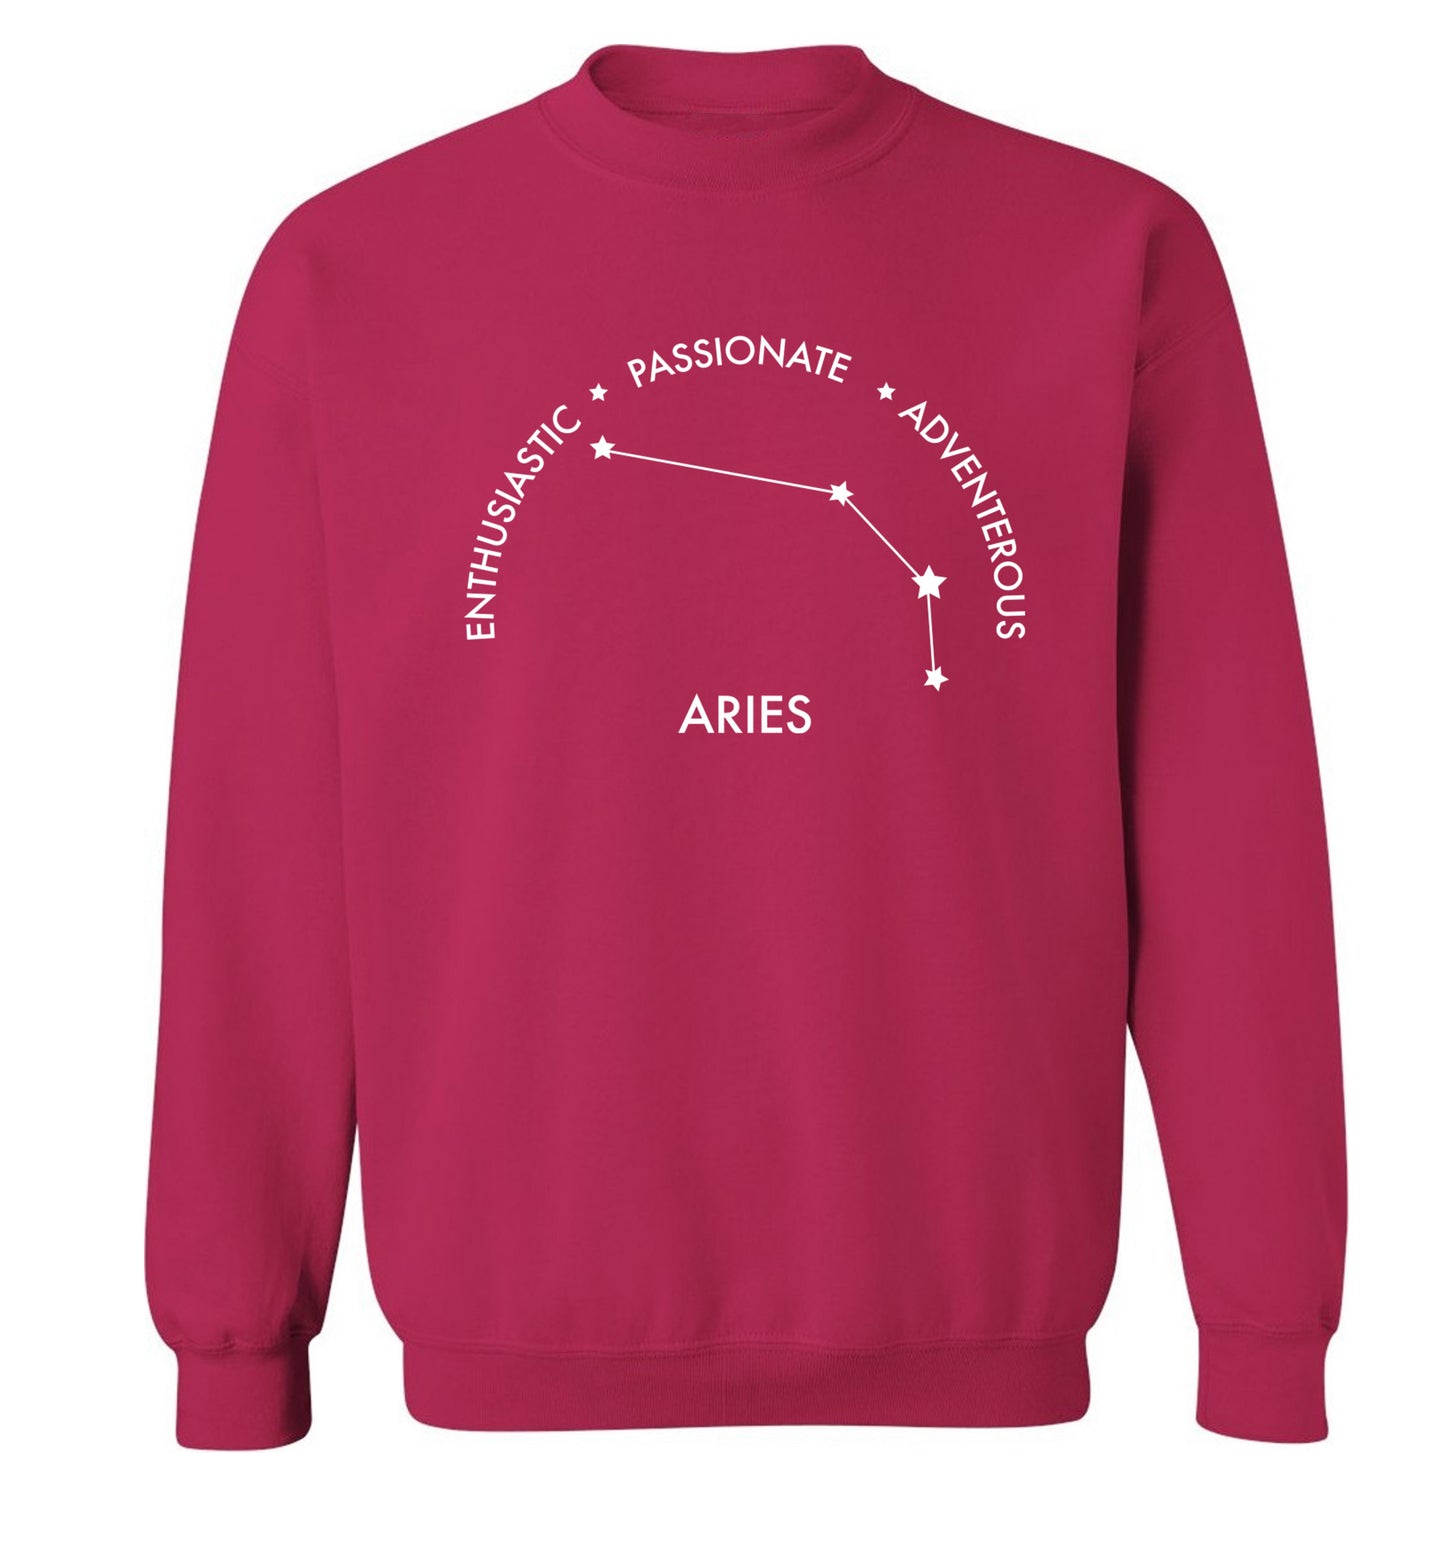 Aries enthusiastic | passionate | adventerous Adult's unisex pink Sweater 2XL